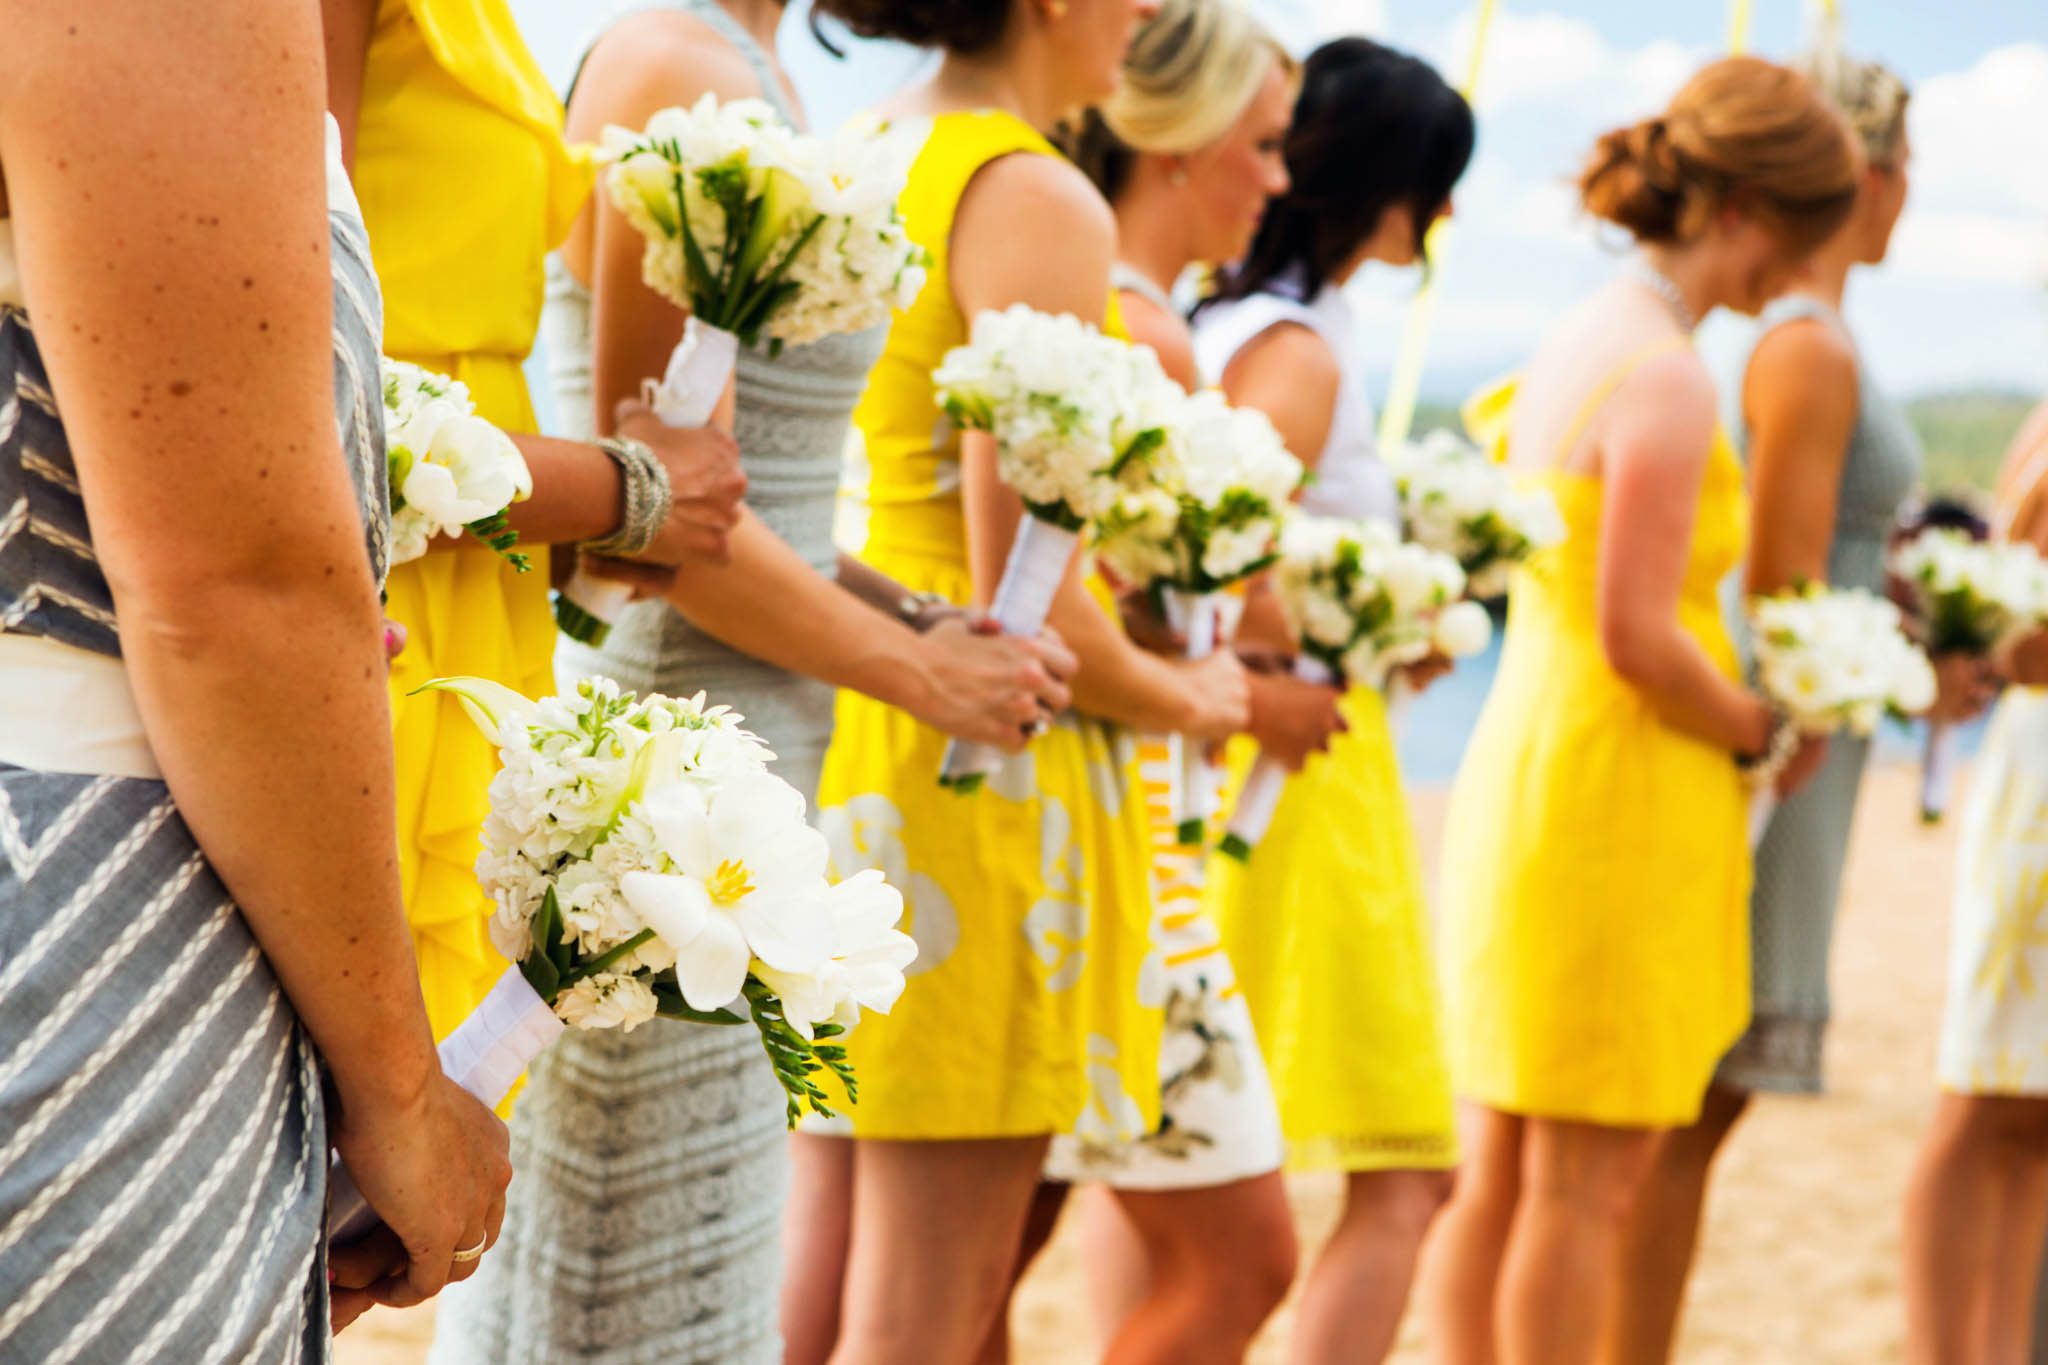 bridesmaids' bouquets during ceremony – South Lake Tahoe lakefront beach wedding nina photographer